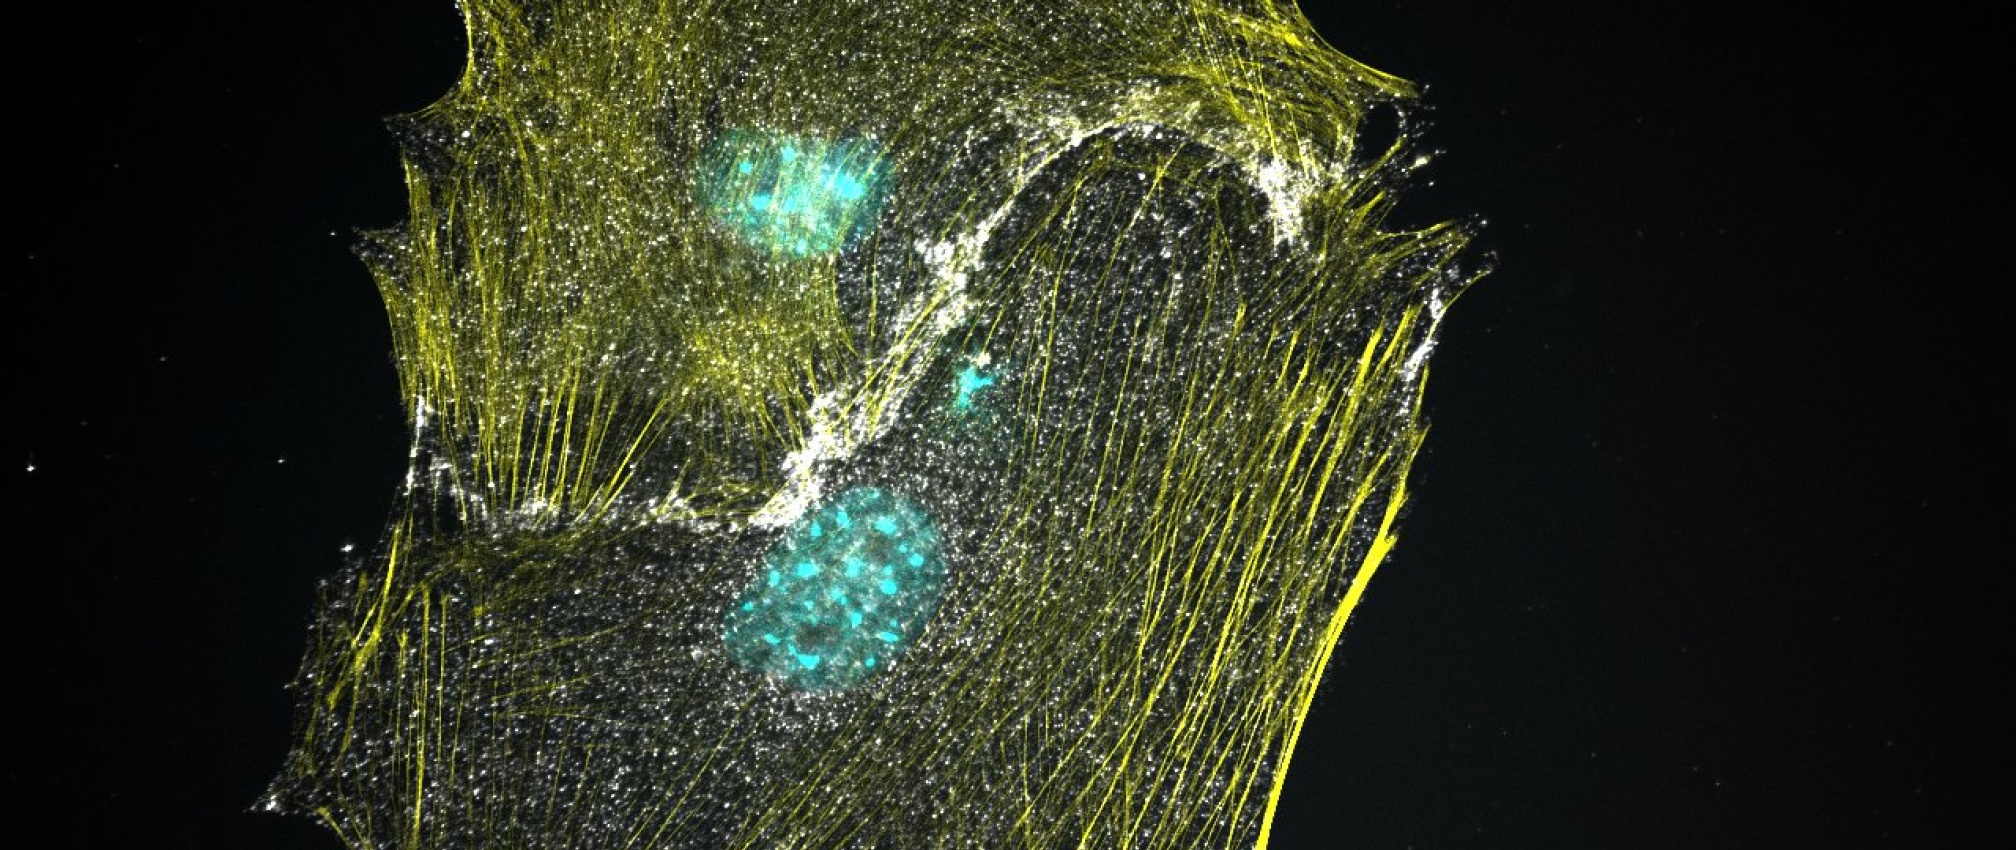 Casein Kinase 1alpha null MEF cells exhibit constitutively active Wnt signaling. Cytosolic beta-catenin (white) localization has now been shifted to the nucleus (blue). Beta-catenin also remains localized at cell-cell contact as part of the cadherin complex. Actin is labeled in yellow.